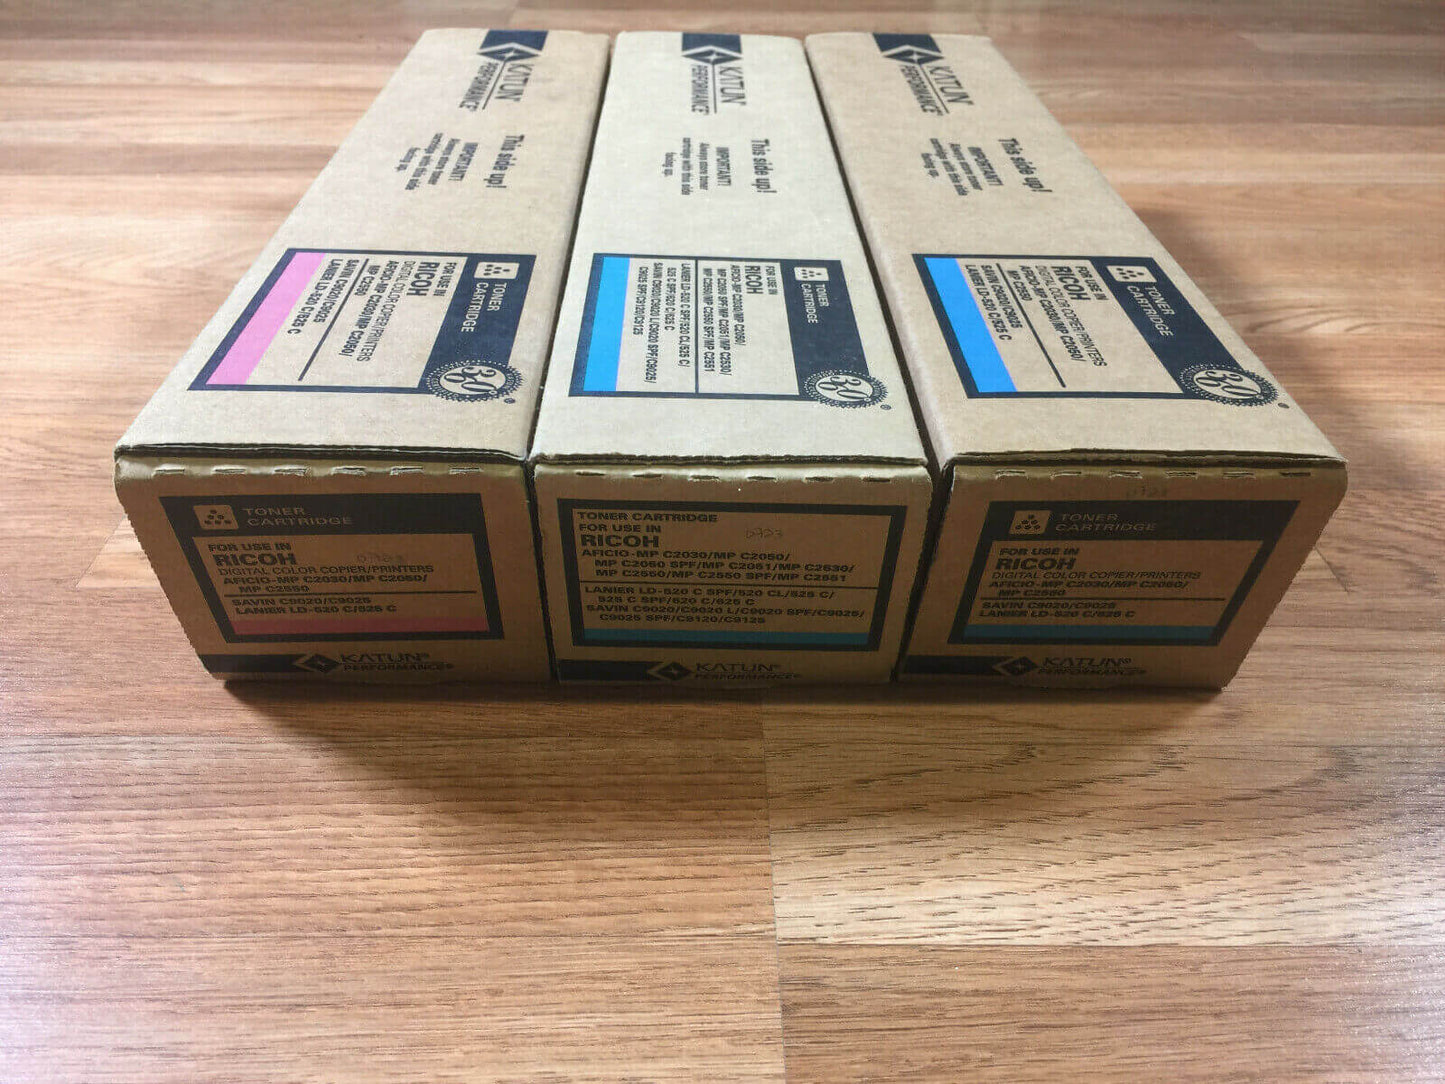 3 Compatible With Ricoh MP C2030 2050 2550 Cyan & Magenta Toner FedEx 2Day Air! - copier-clearance-center